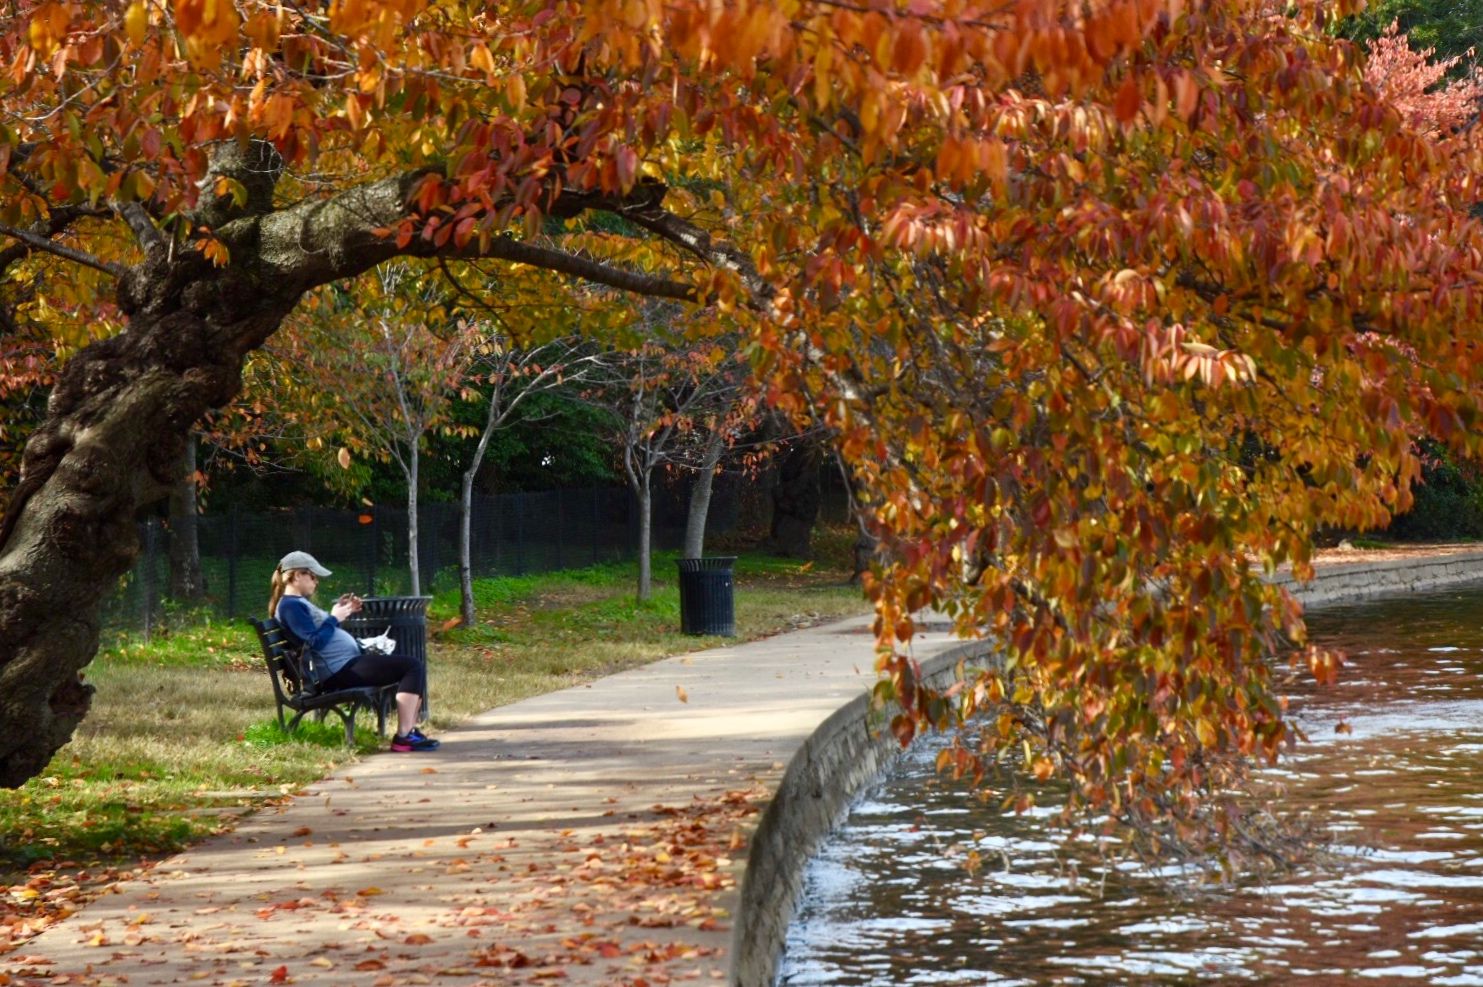 The Tidal Basin boasts vibrant oranges and yellows as fall foliage comes to the D.C. area. (WTOP/Dave Dildine)